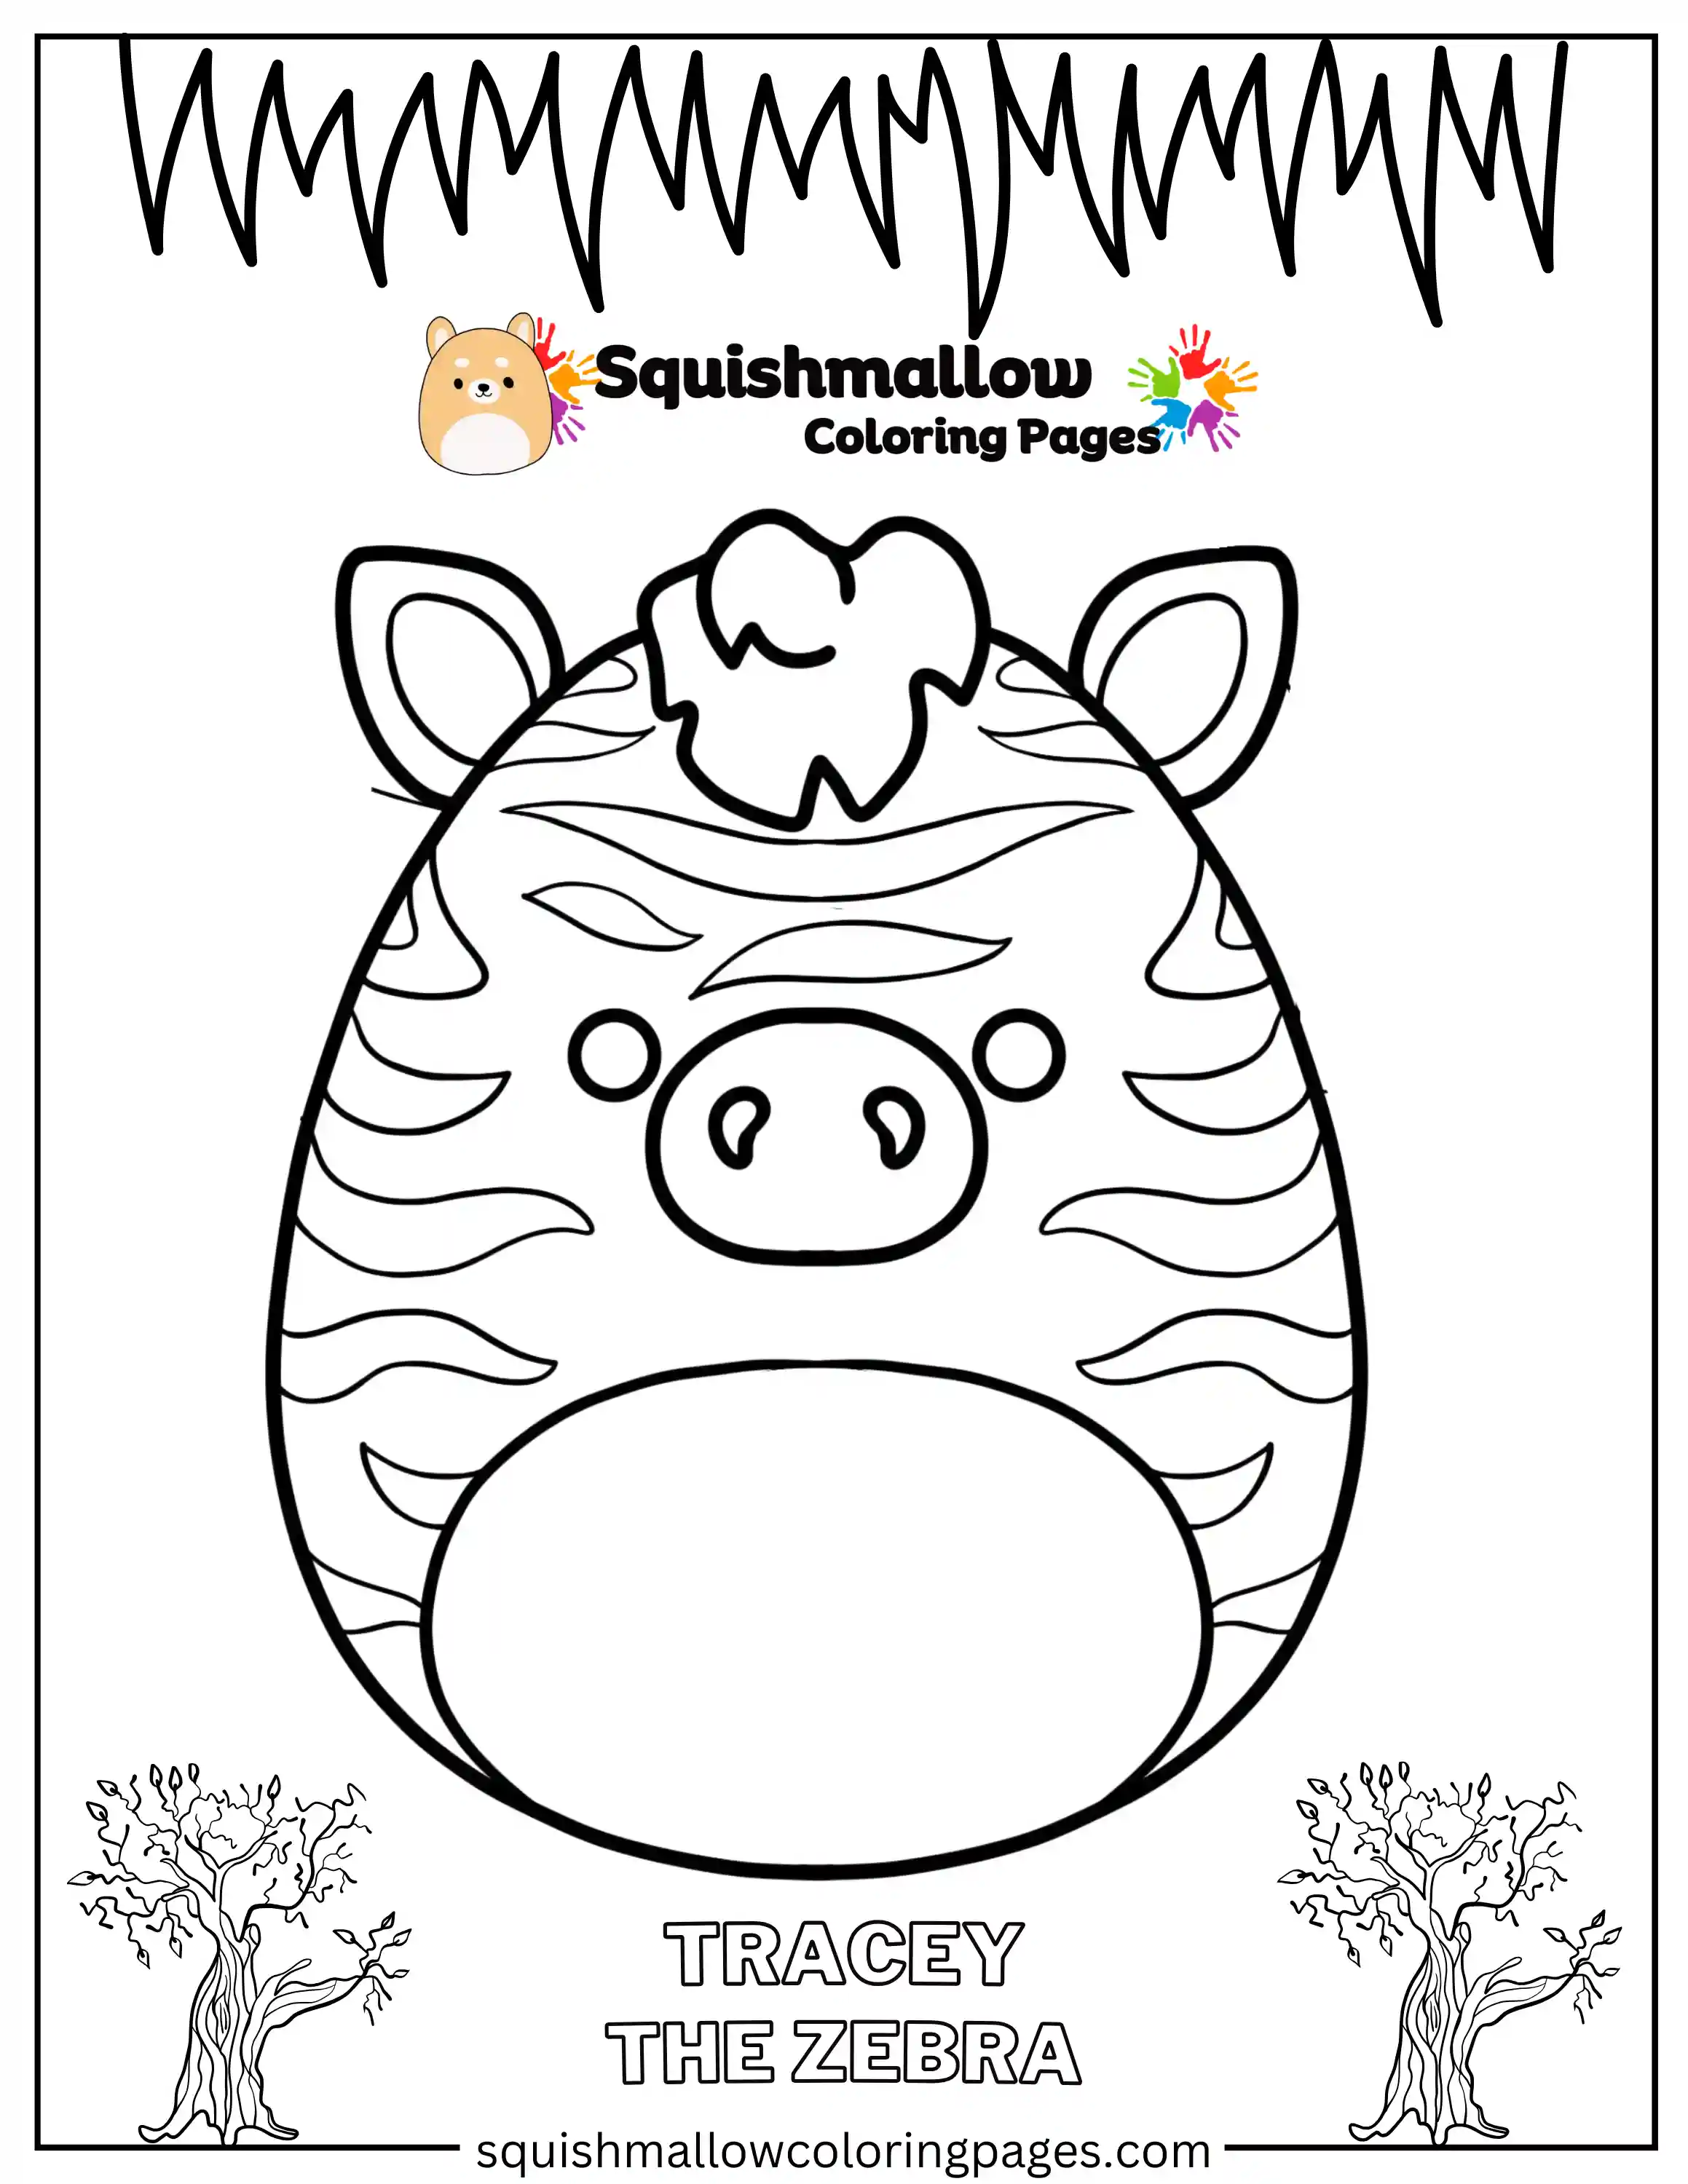 Tracey The Zebra Squishmallow Coloring Pages